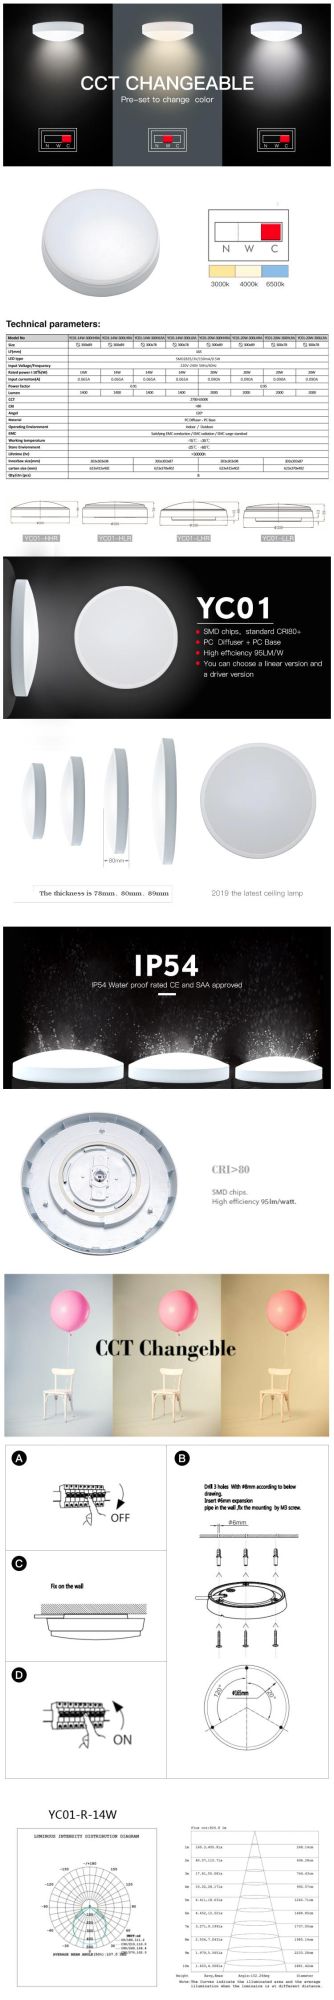 Motion Sensor, Dimmable and Emergency Version 16W Bulkhead Round LED Ceiling Light